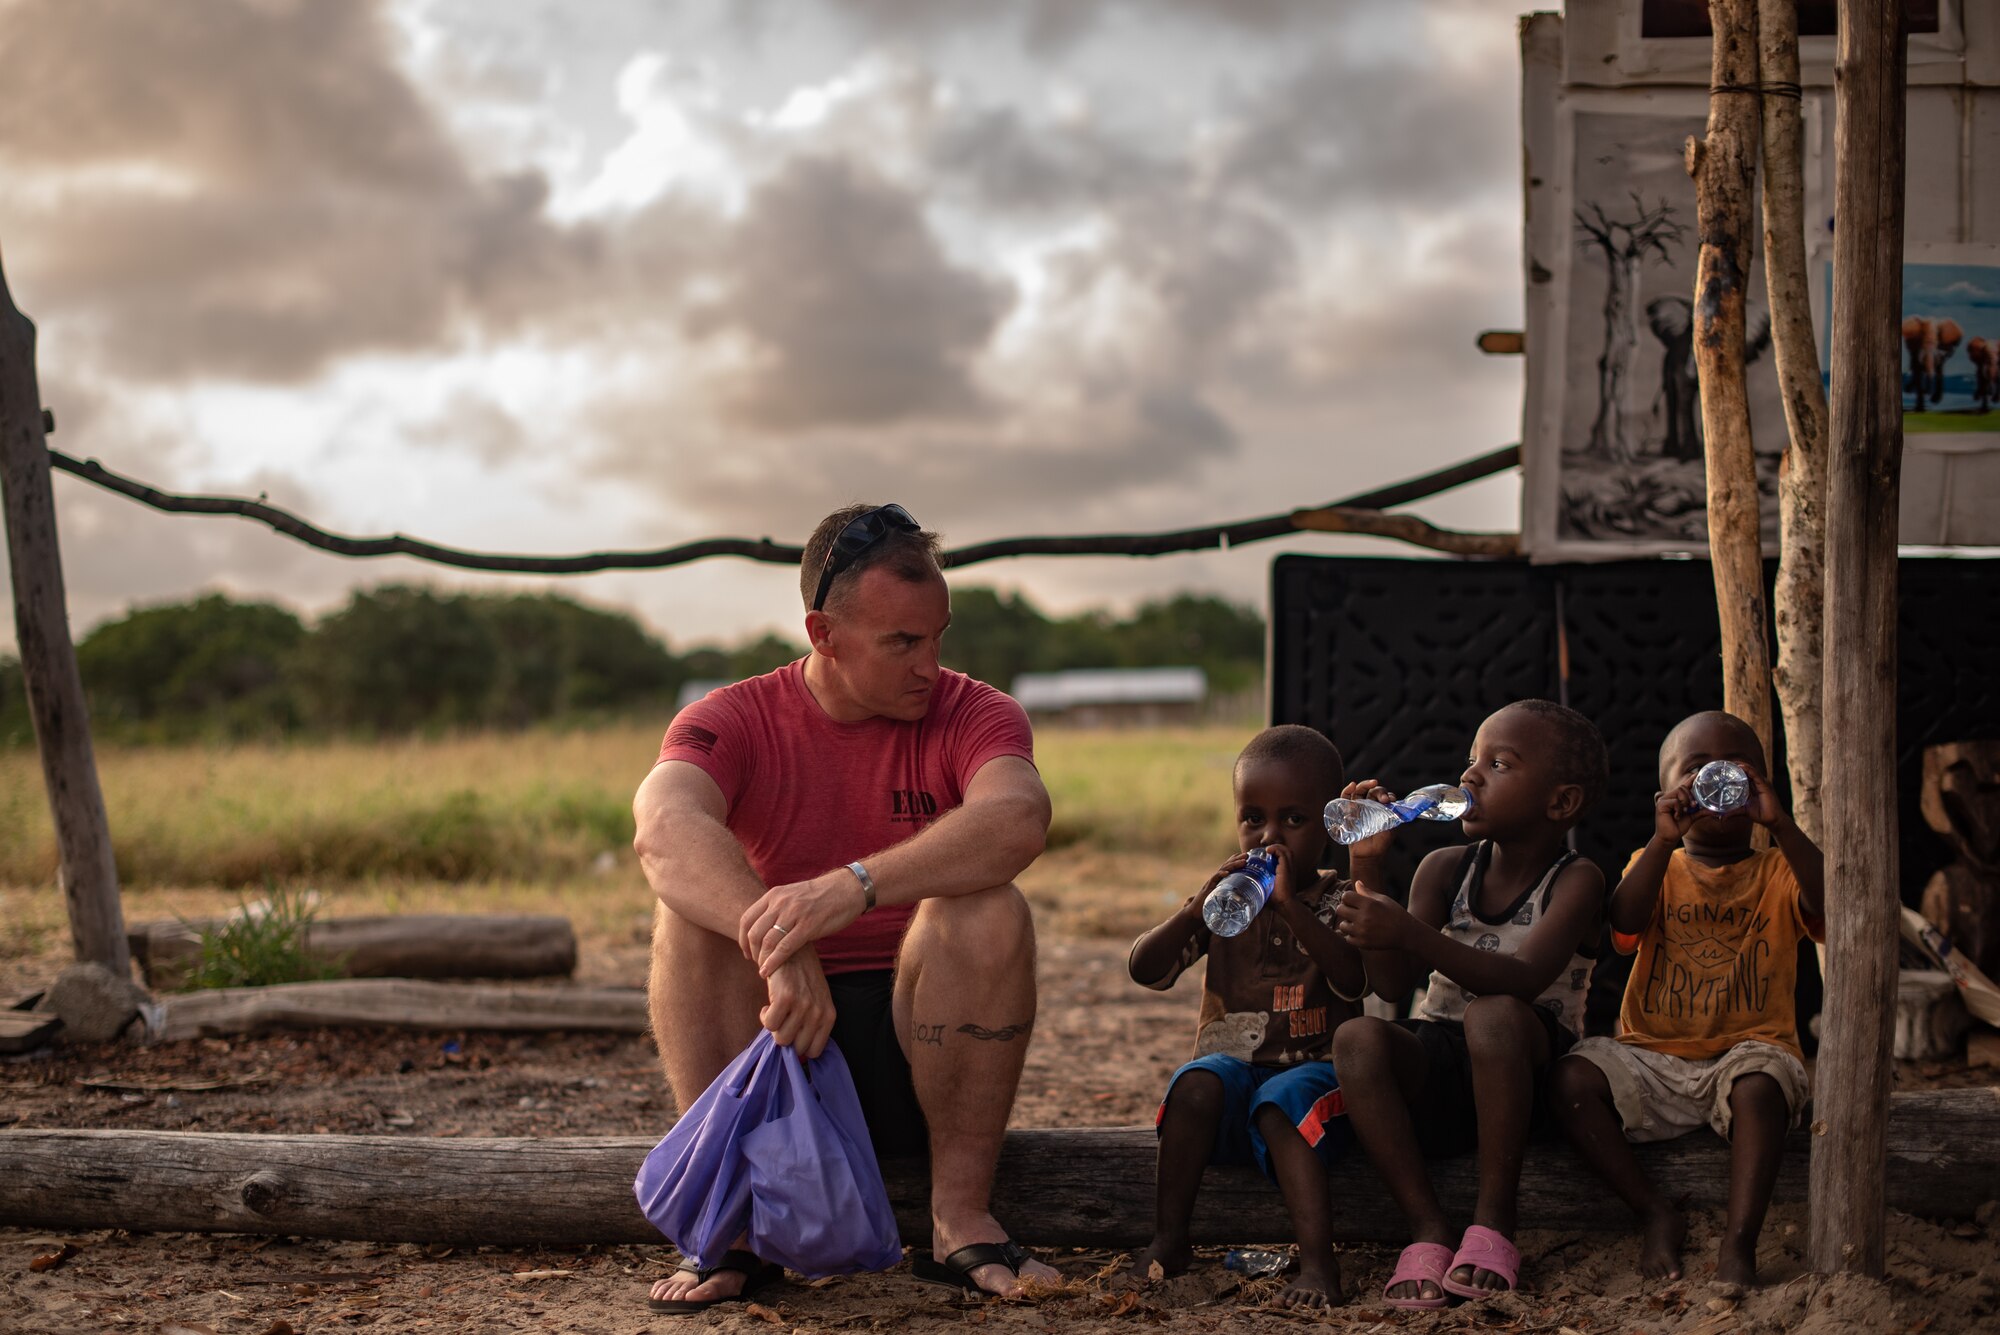 U.S. Air Force Chief Master Sgt. Jeremy Unterseher, 435th Air Expeditionary Wing and 435th Air Ground Operations Wing command chief, talks to children at a village near Camp Simba, Kenya, Aug. 30, 2019. Unterseher and Col. Daniel C. Clayton, 435th AEW and 435th AGOW commander, visited the village as part of an immersion tour for the 435th AEW. (U.S. Air Force photo by Staff Sgt. Devin Boyer)